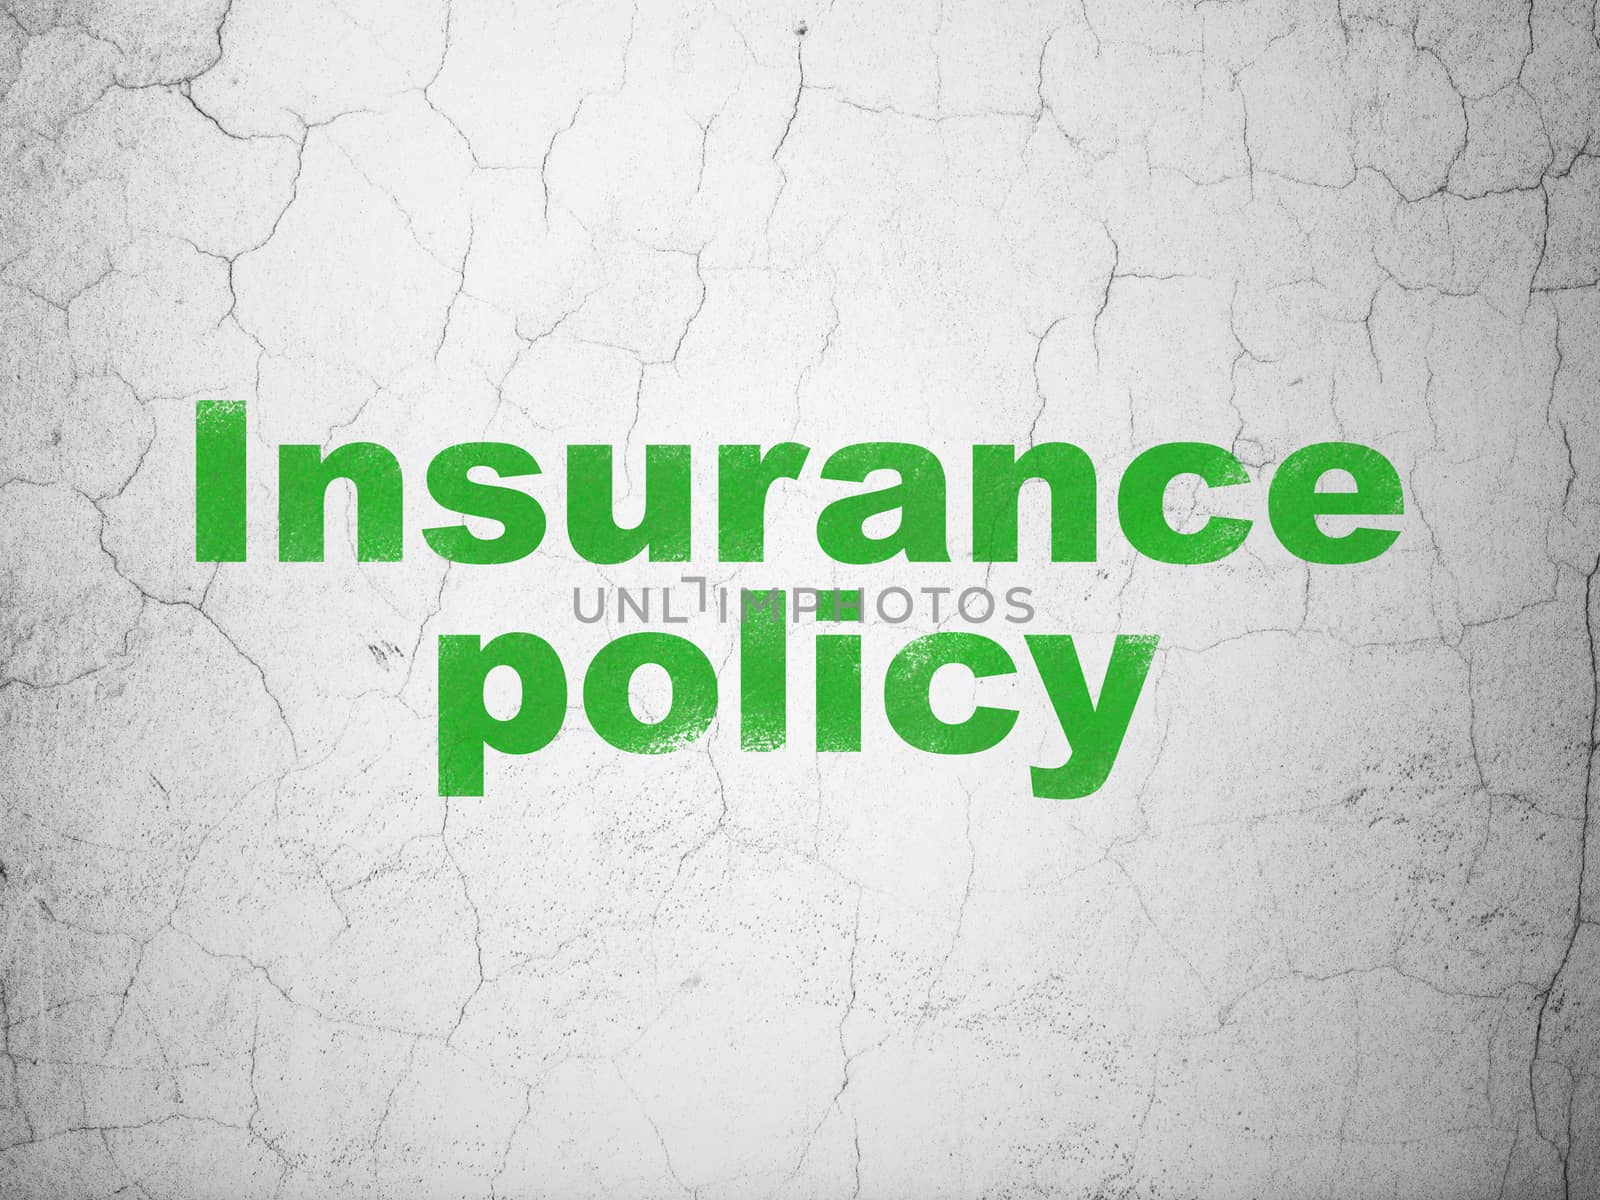 Insurance concept: Green Insurance Policy on textured concrete wall background